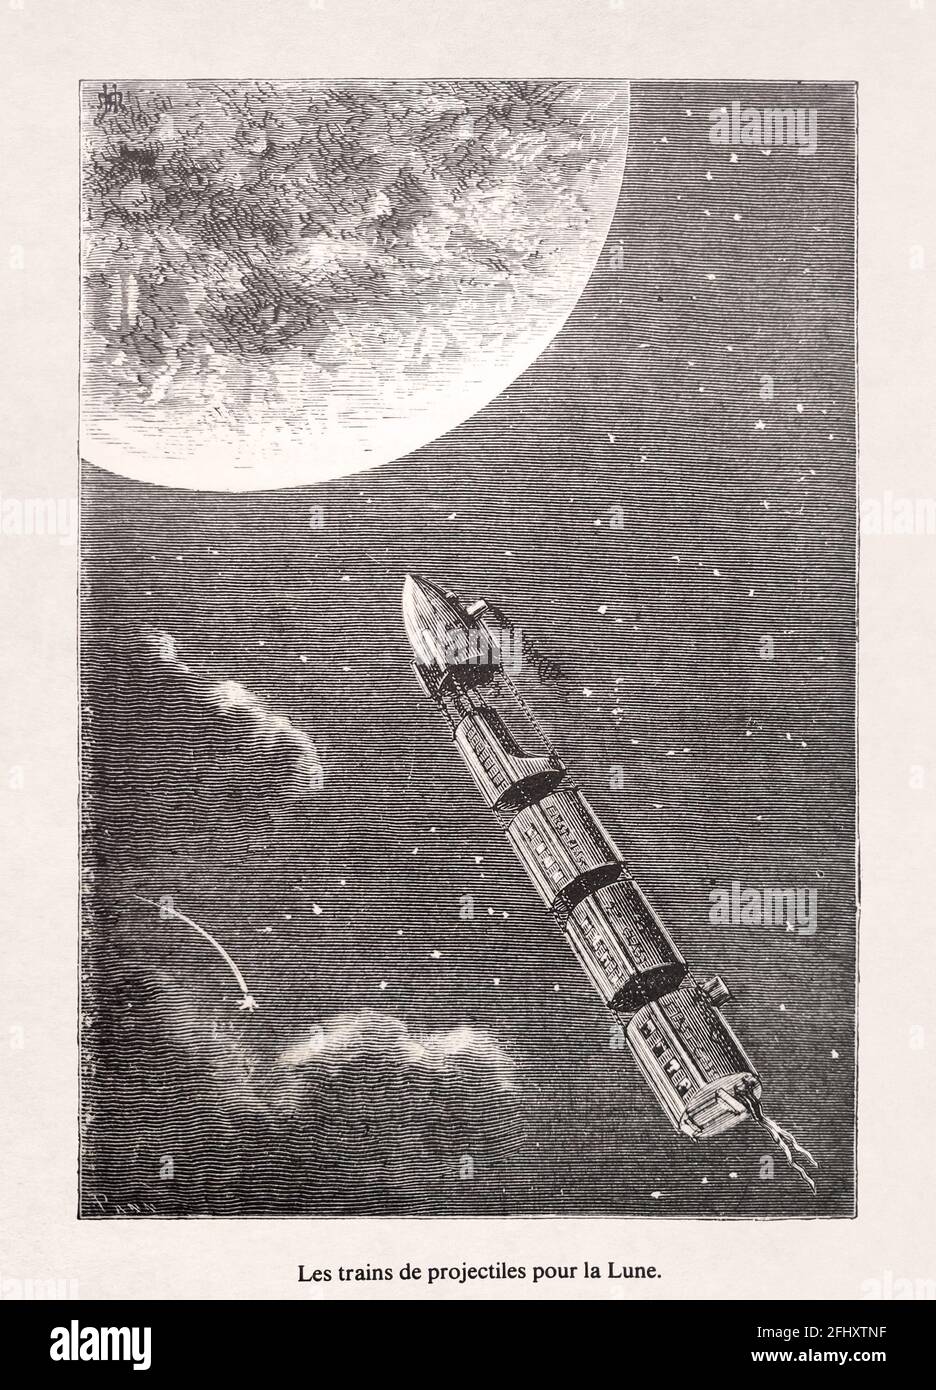 Projectile trains for the moon drawn by Montaut in 1890 to illustrate Jules Verne's book From the Earth to the Moon. Stock Photo